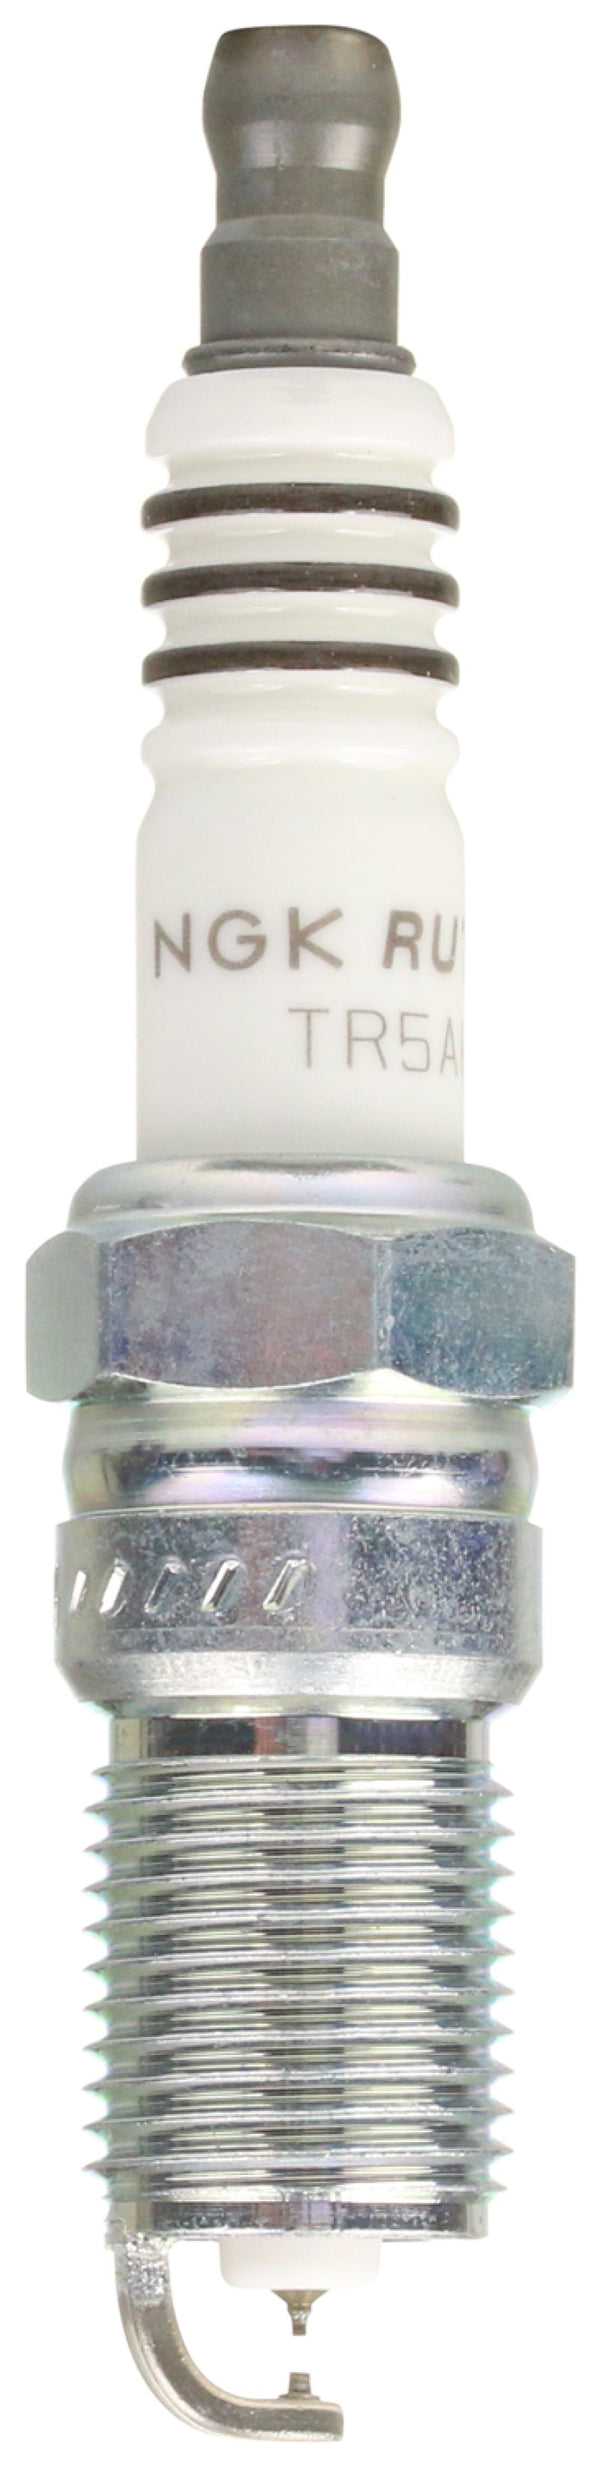 NGK Ruthenium HX Spark Plug Box of 4 (TR5AHX) - Premium Spark Plugs from NGK - Just 185.32 SR! Shop now at Motors